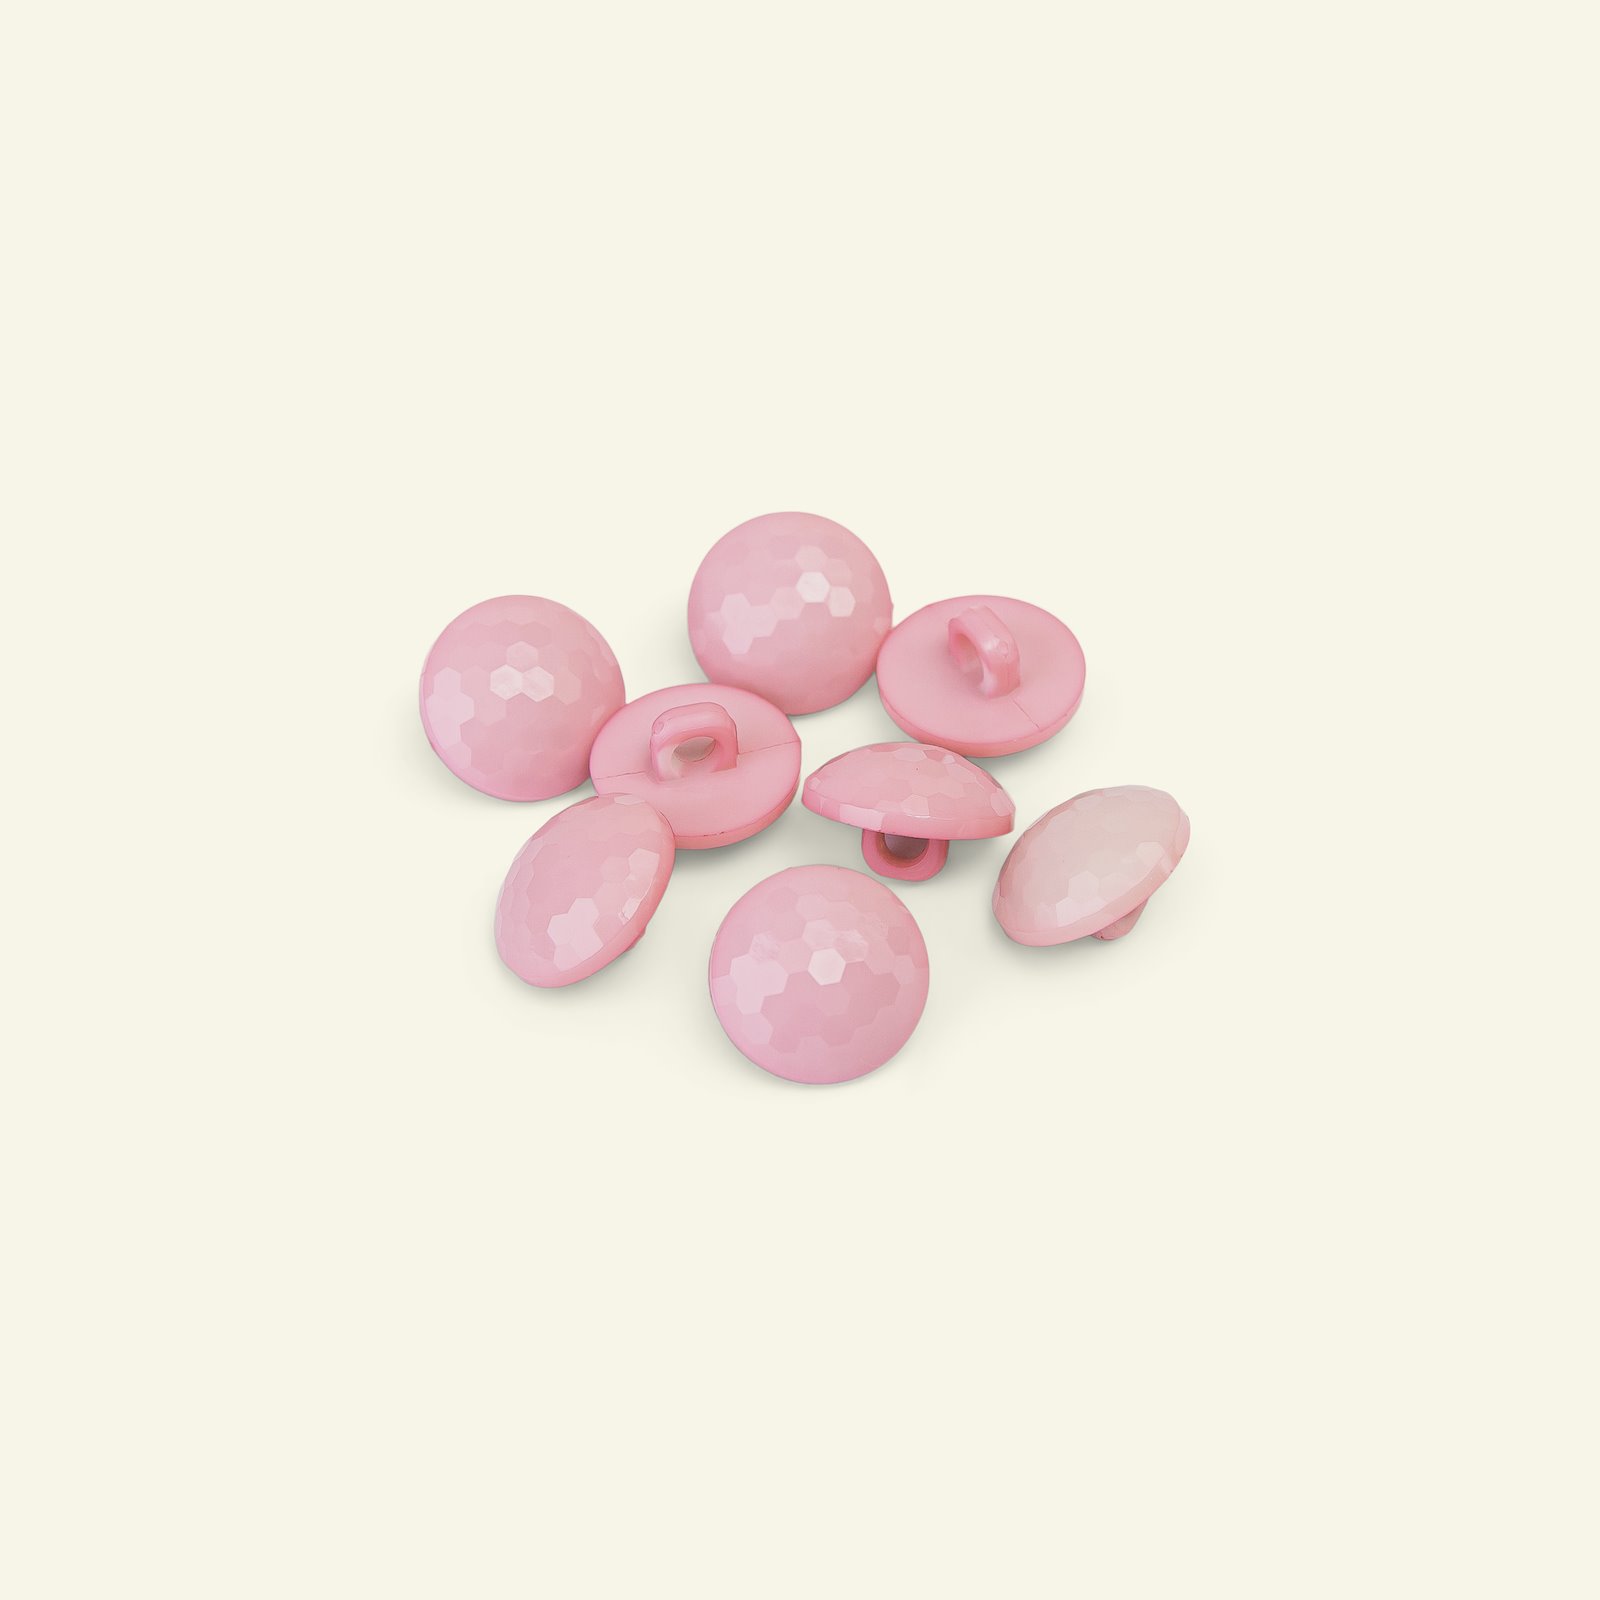 Shank button faceted 15mm pink 8pcs 33364_pack